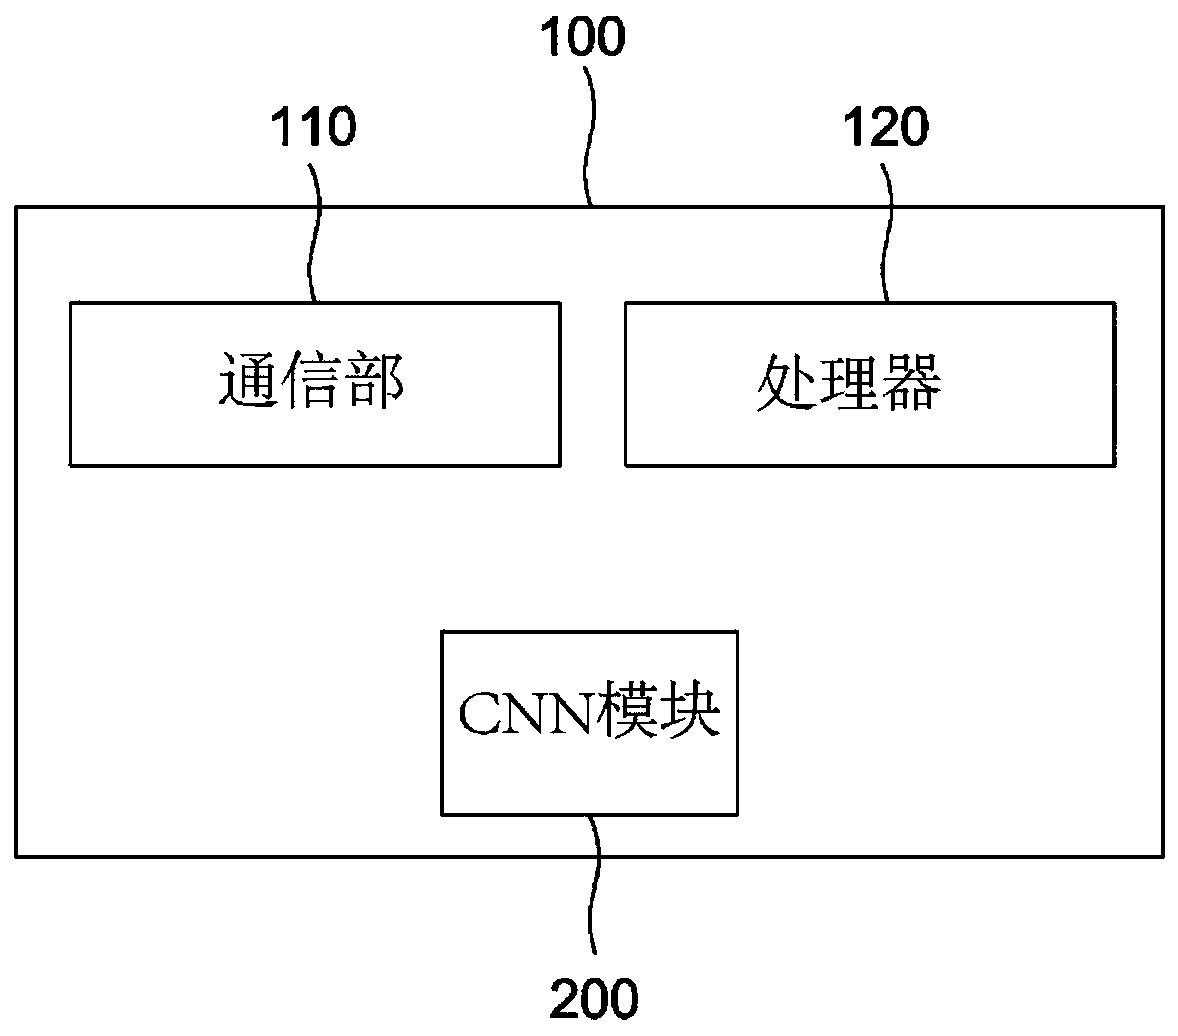 Method and device for generating image data set to be used for learning CNN (Convolutional Neural Network)